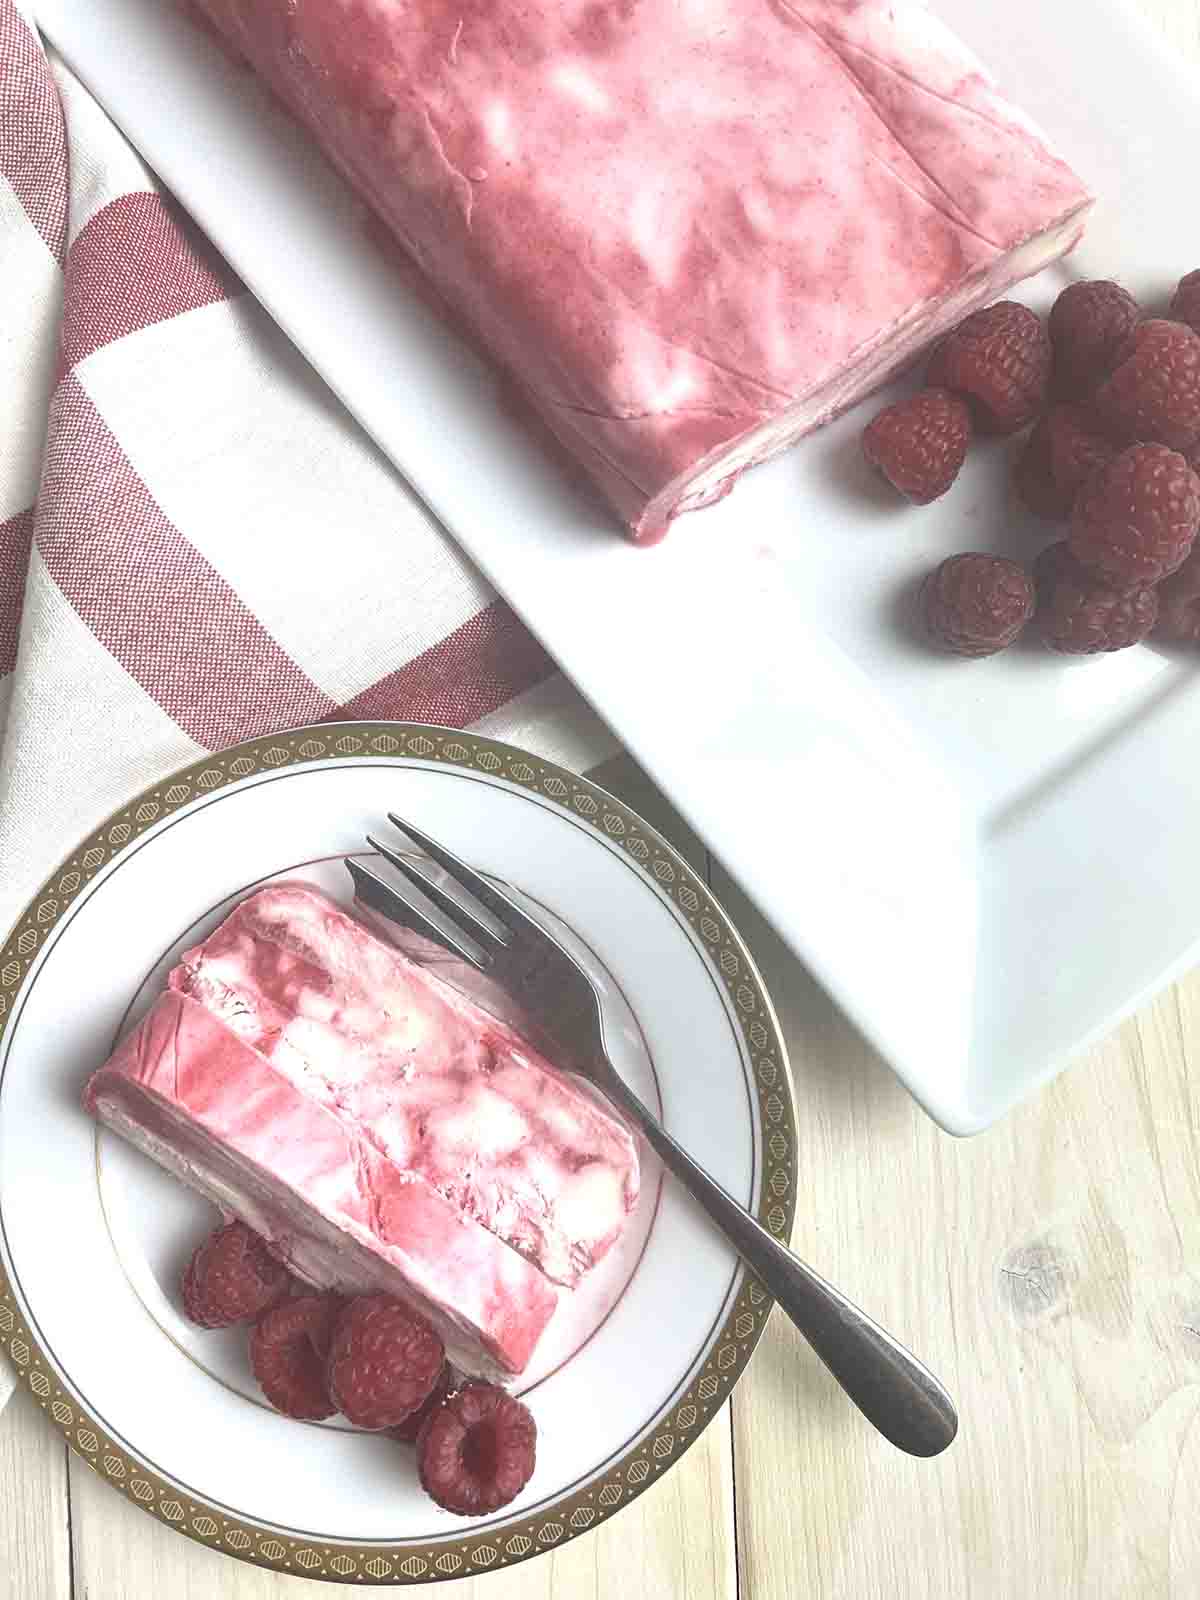 slices of no churn raspberry ice cream on a plate with dessert in the background.